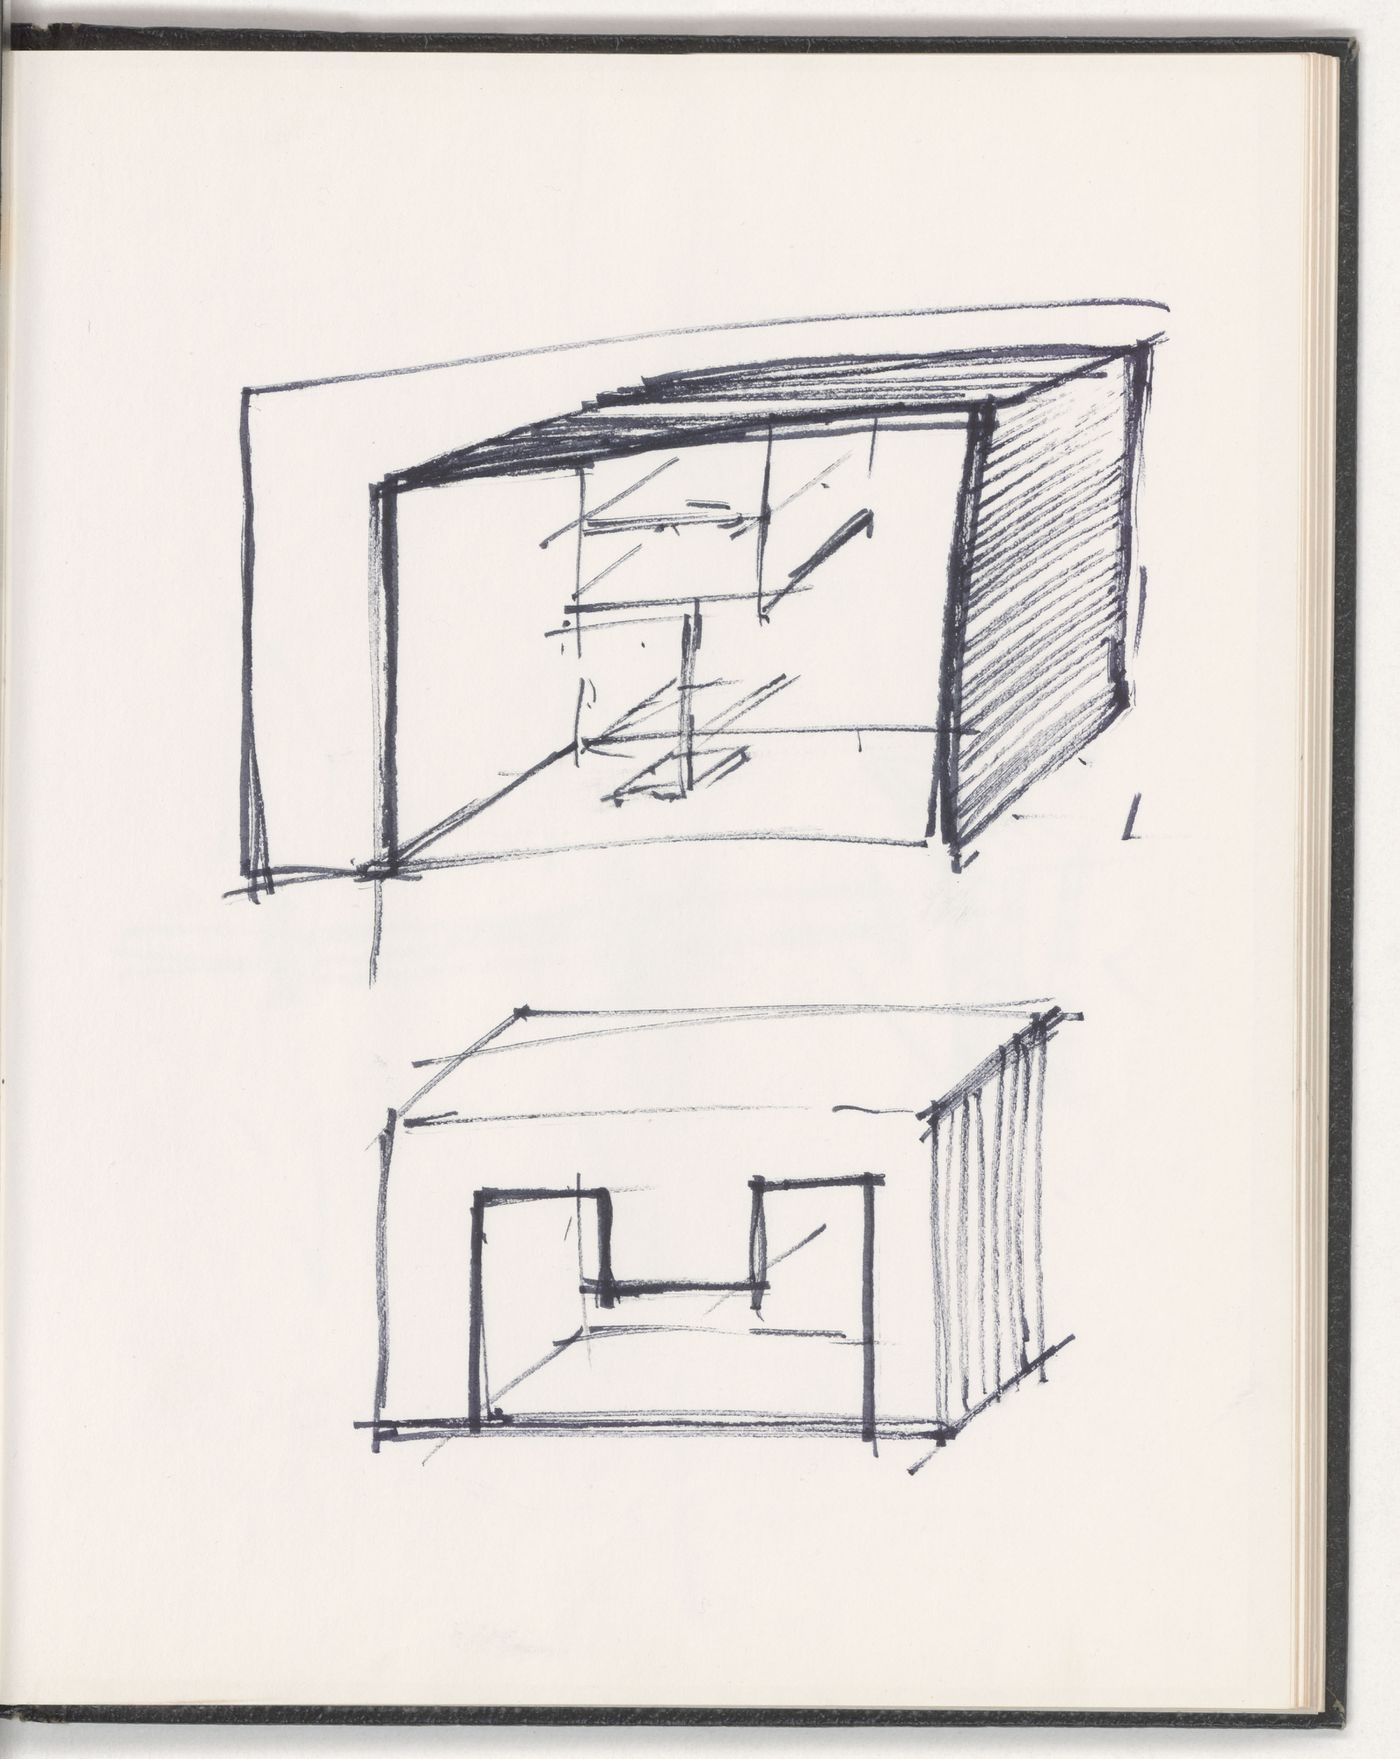 Sketches for architectural proposal